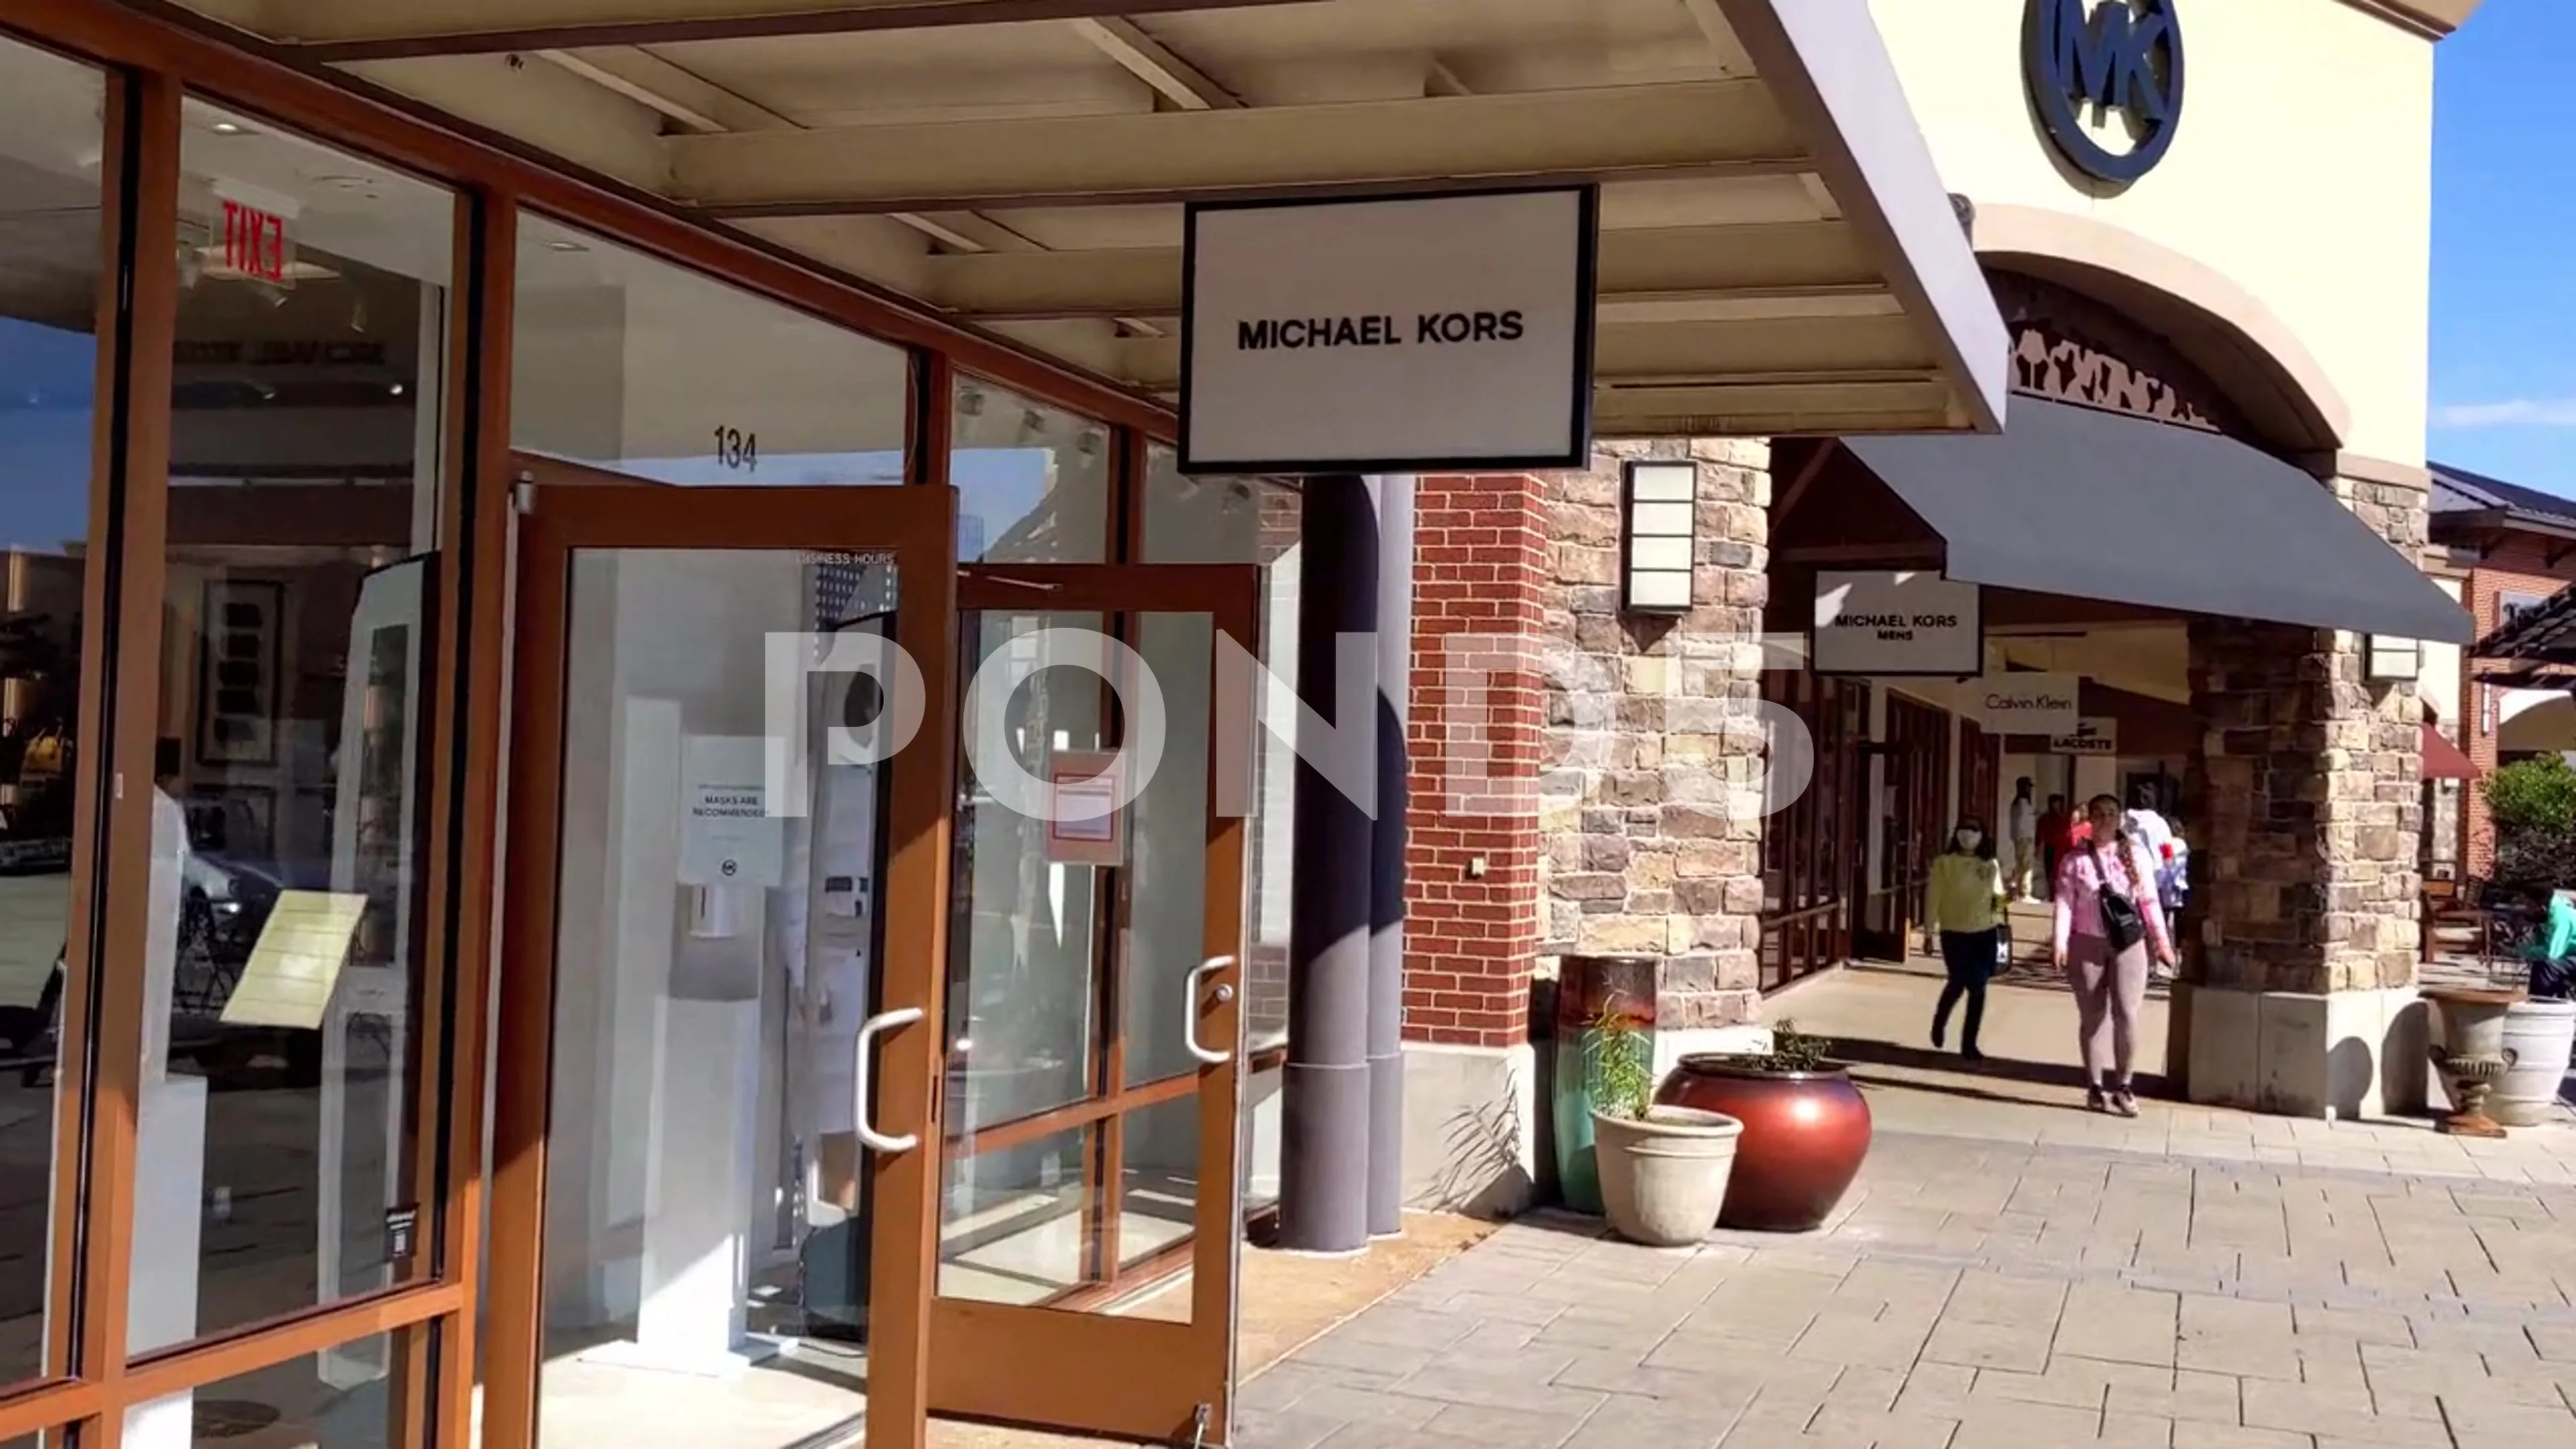 Michael Kors Outlet at Allen Premium Outlets in Texas